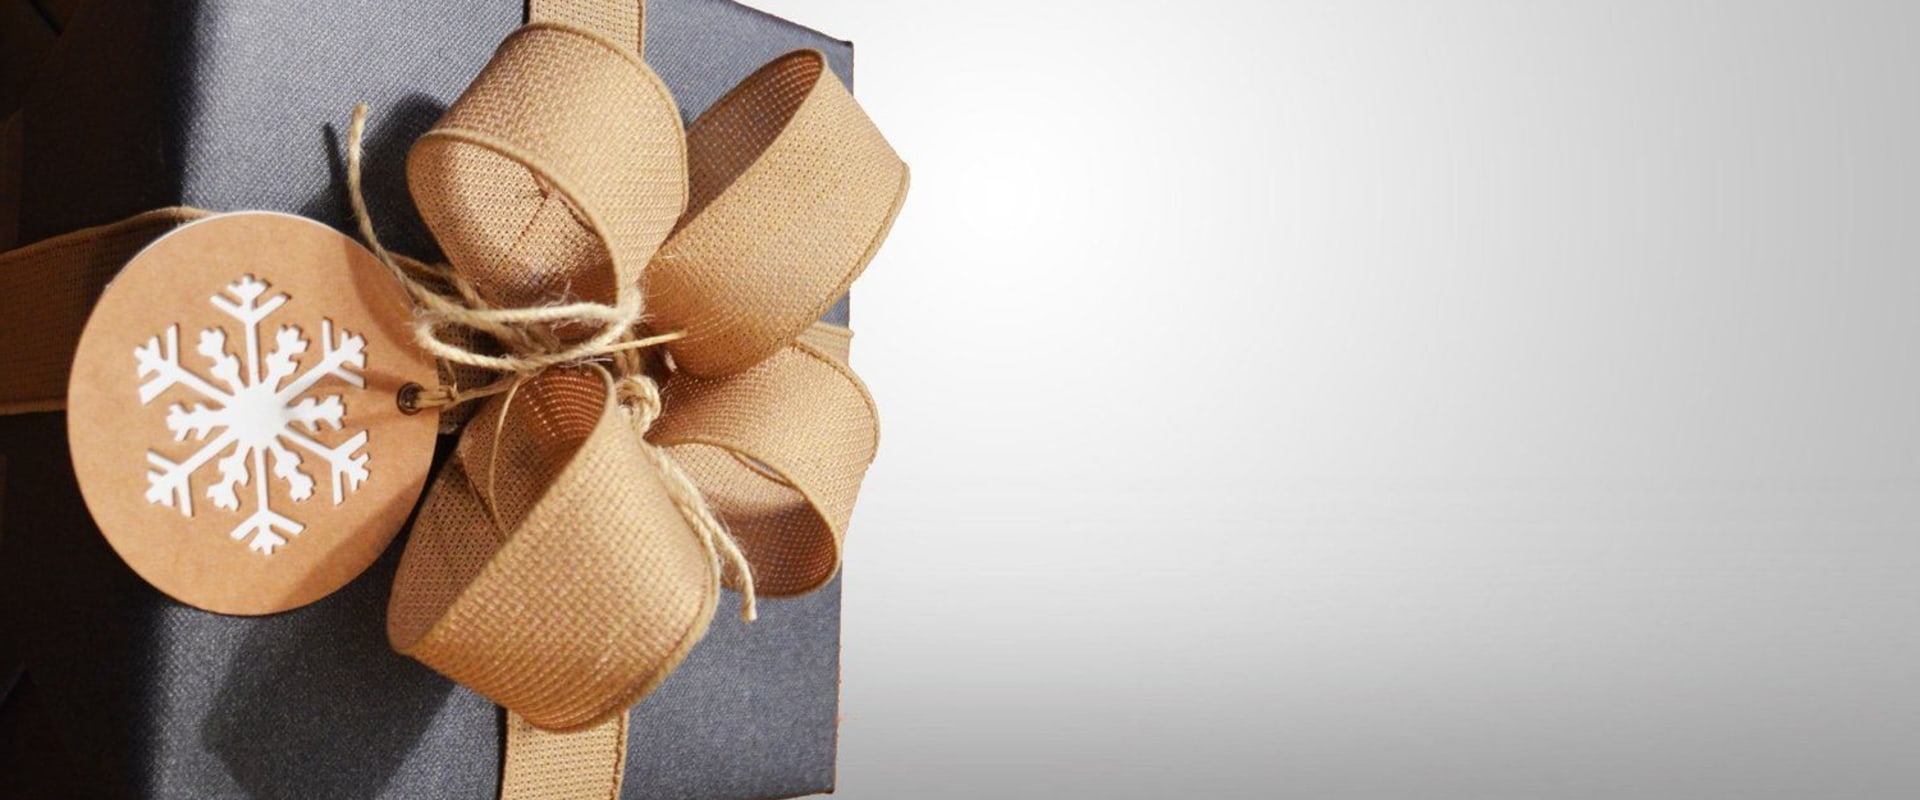 What kind of gifts are tax deductible?